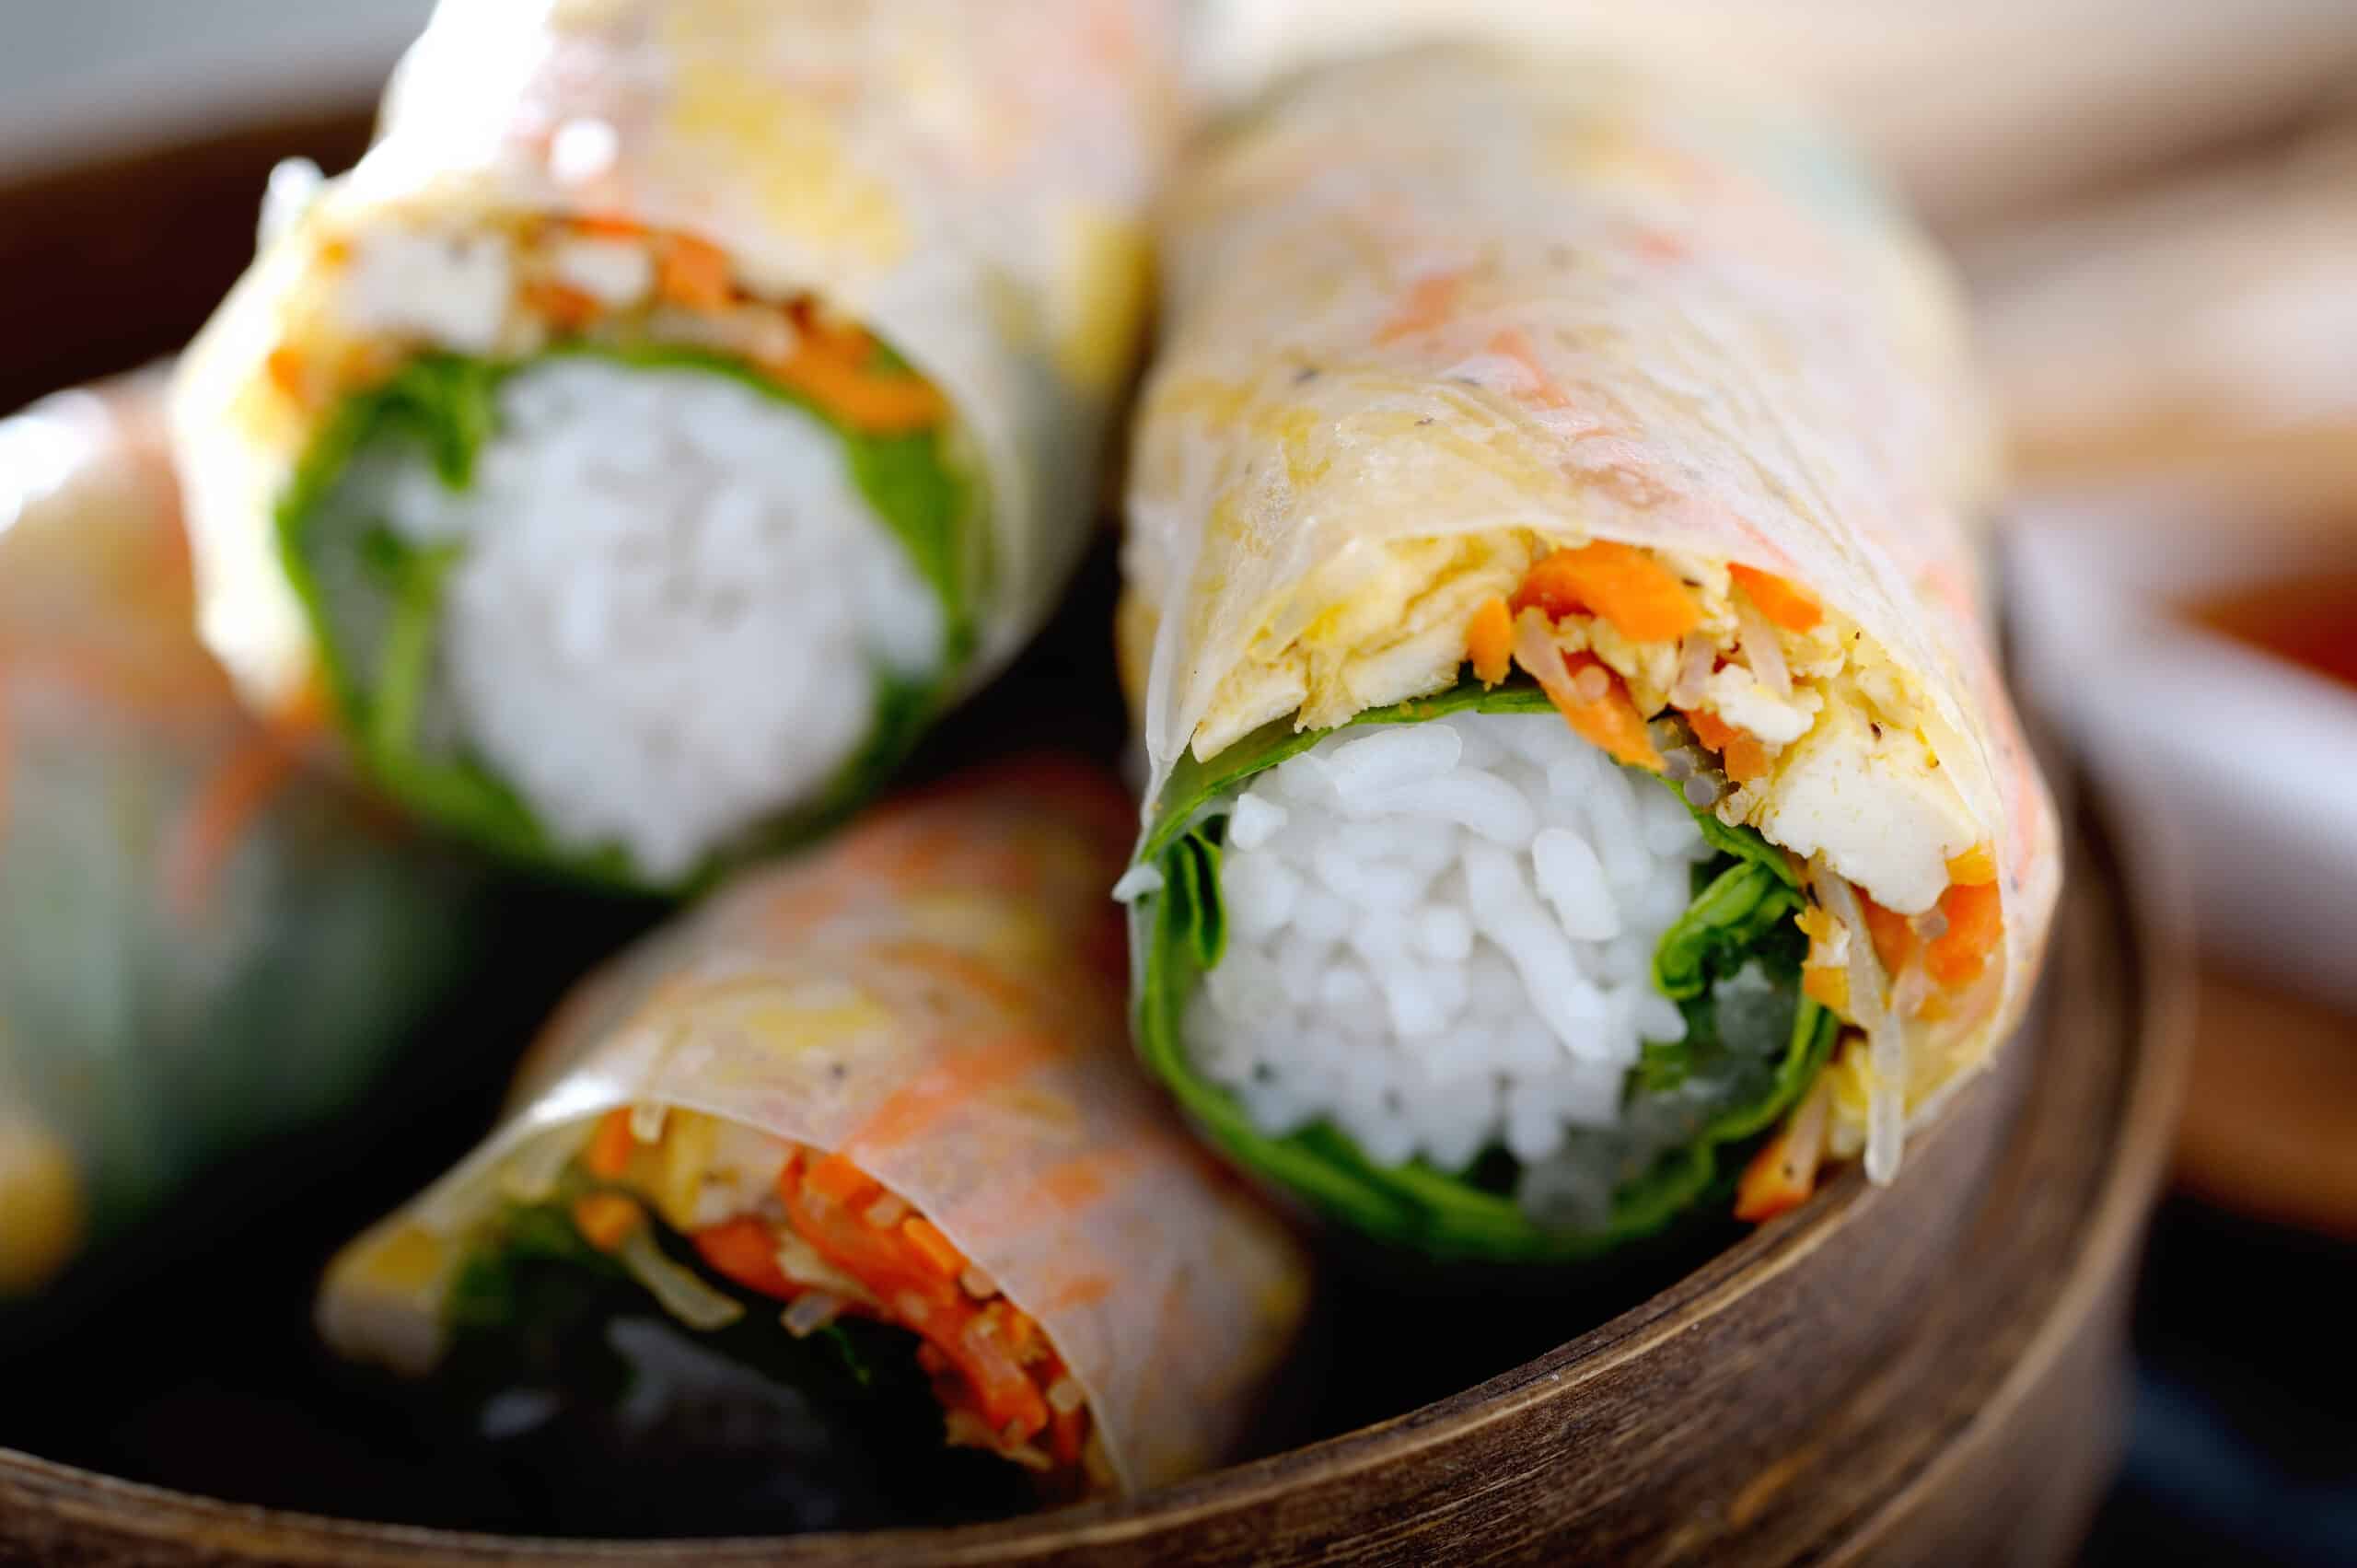 Spring Rolls made of Tofu,Rice Noodle and Vegetables, Vietnamese Cuisine.